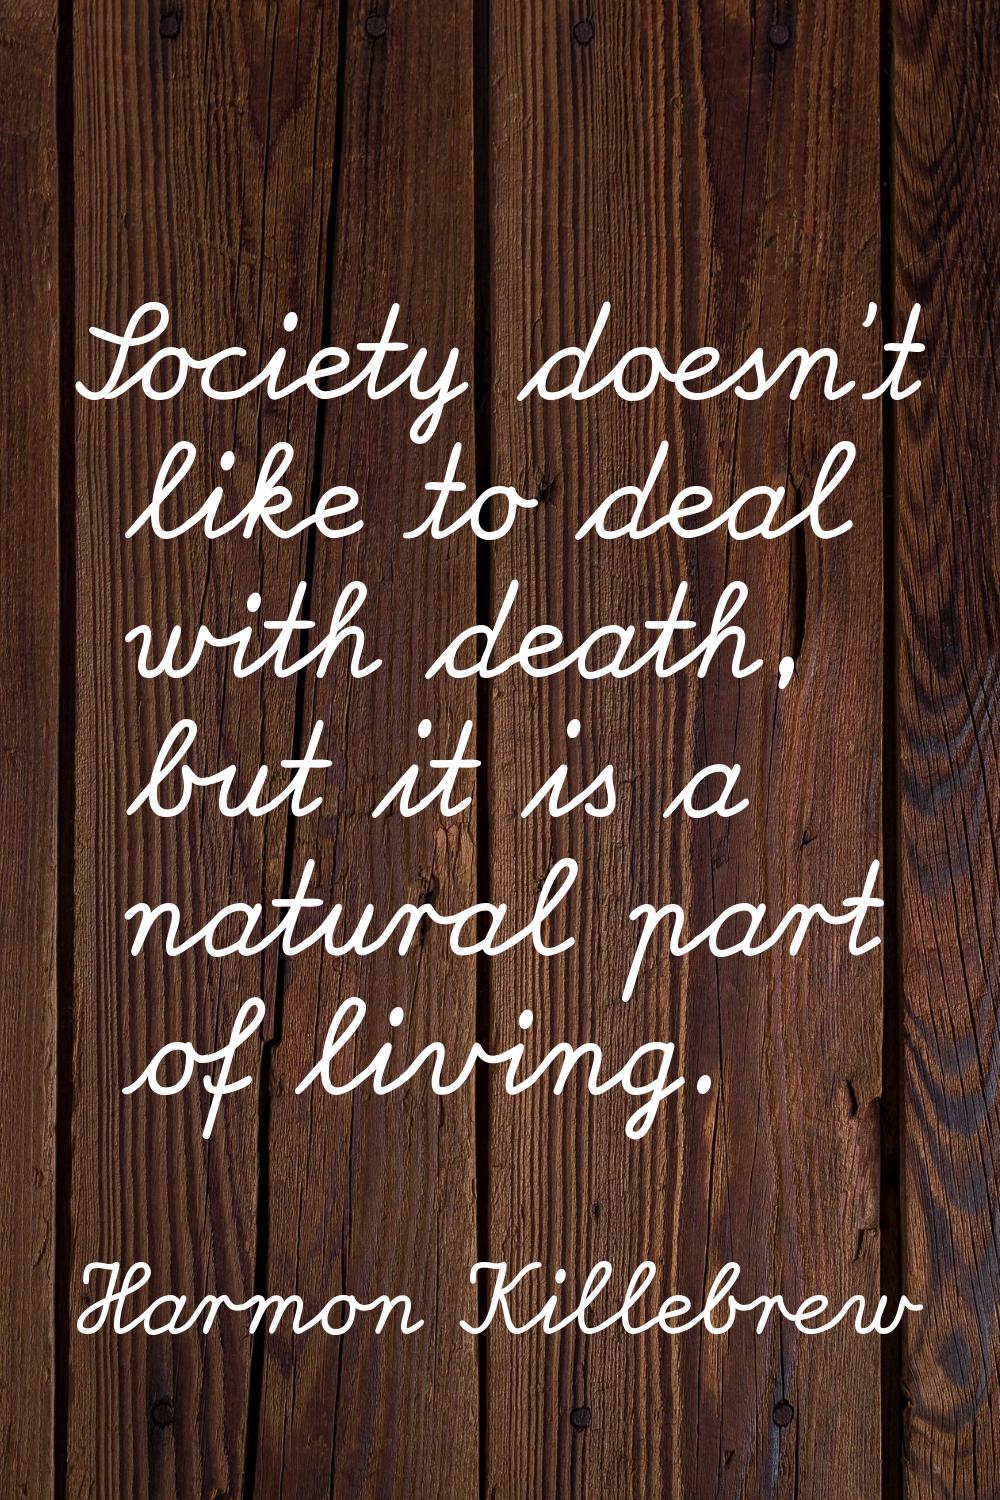 Society doesn't like to deal with death, but it is a natural part of living.